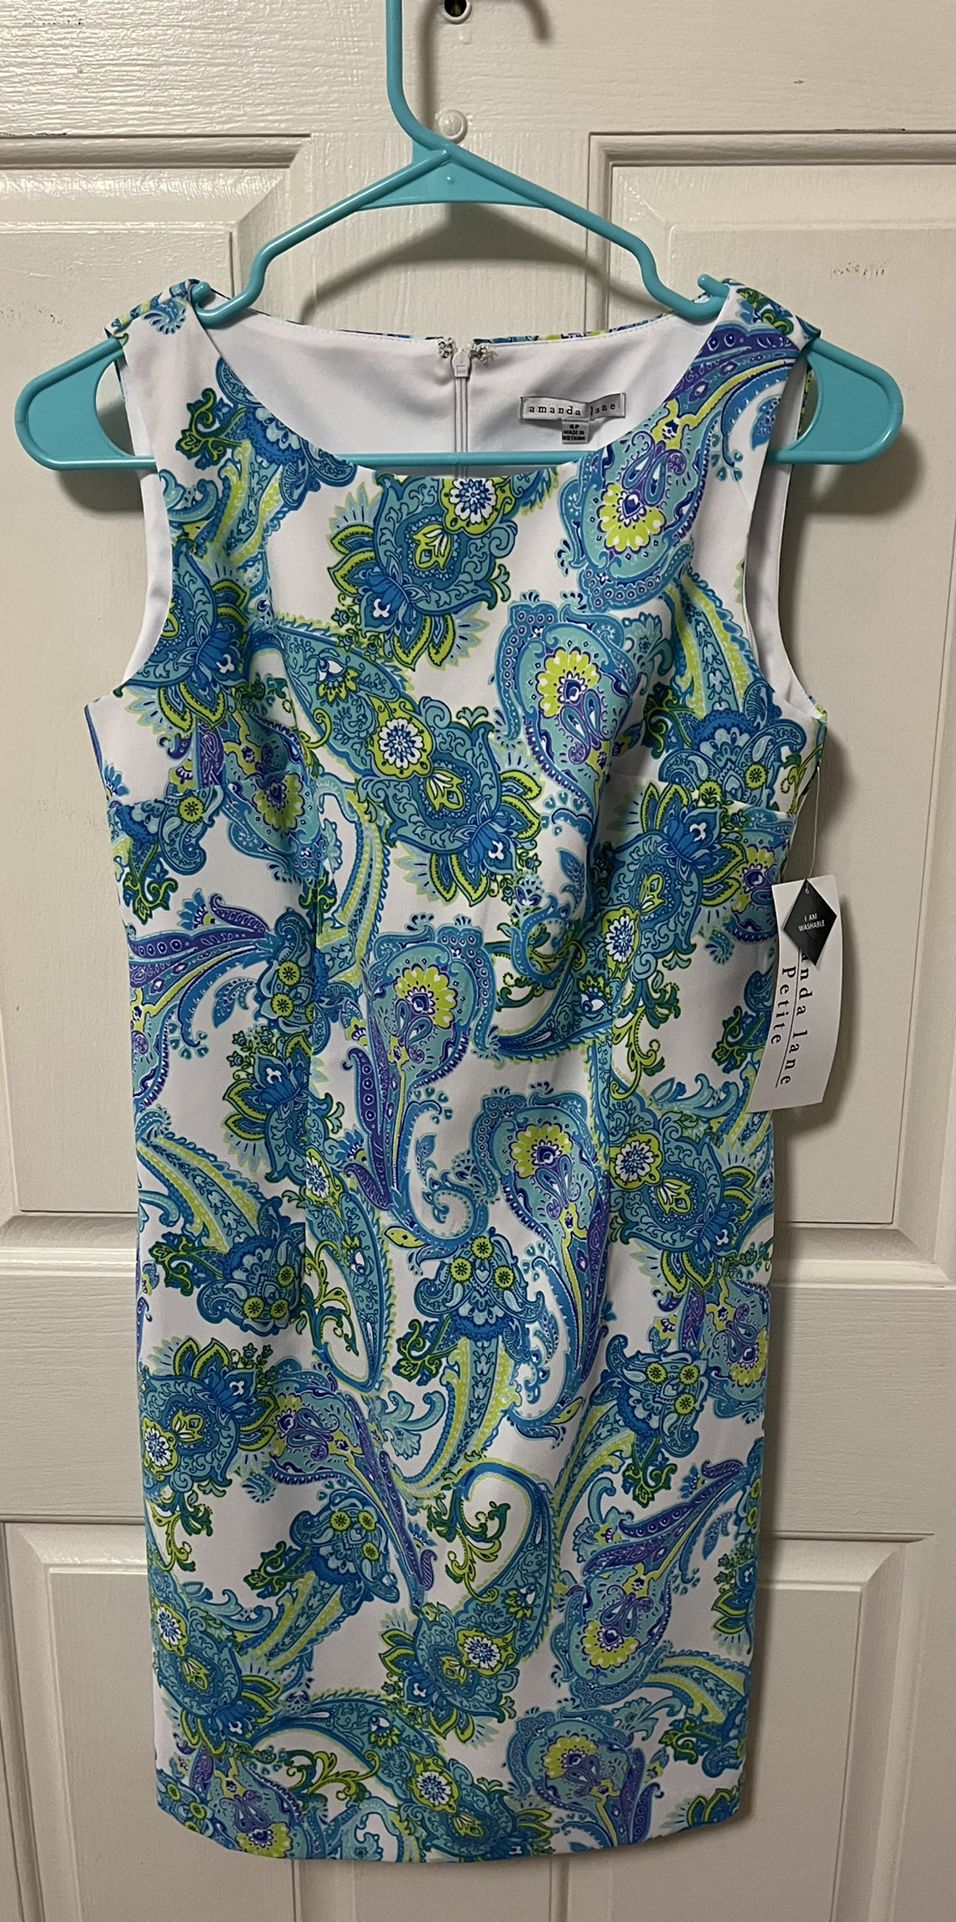 Paisley Women’s Petite 4 Dress New With Tags